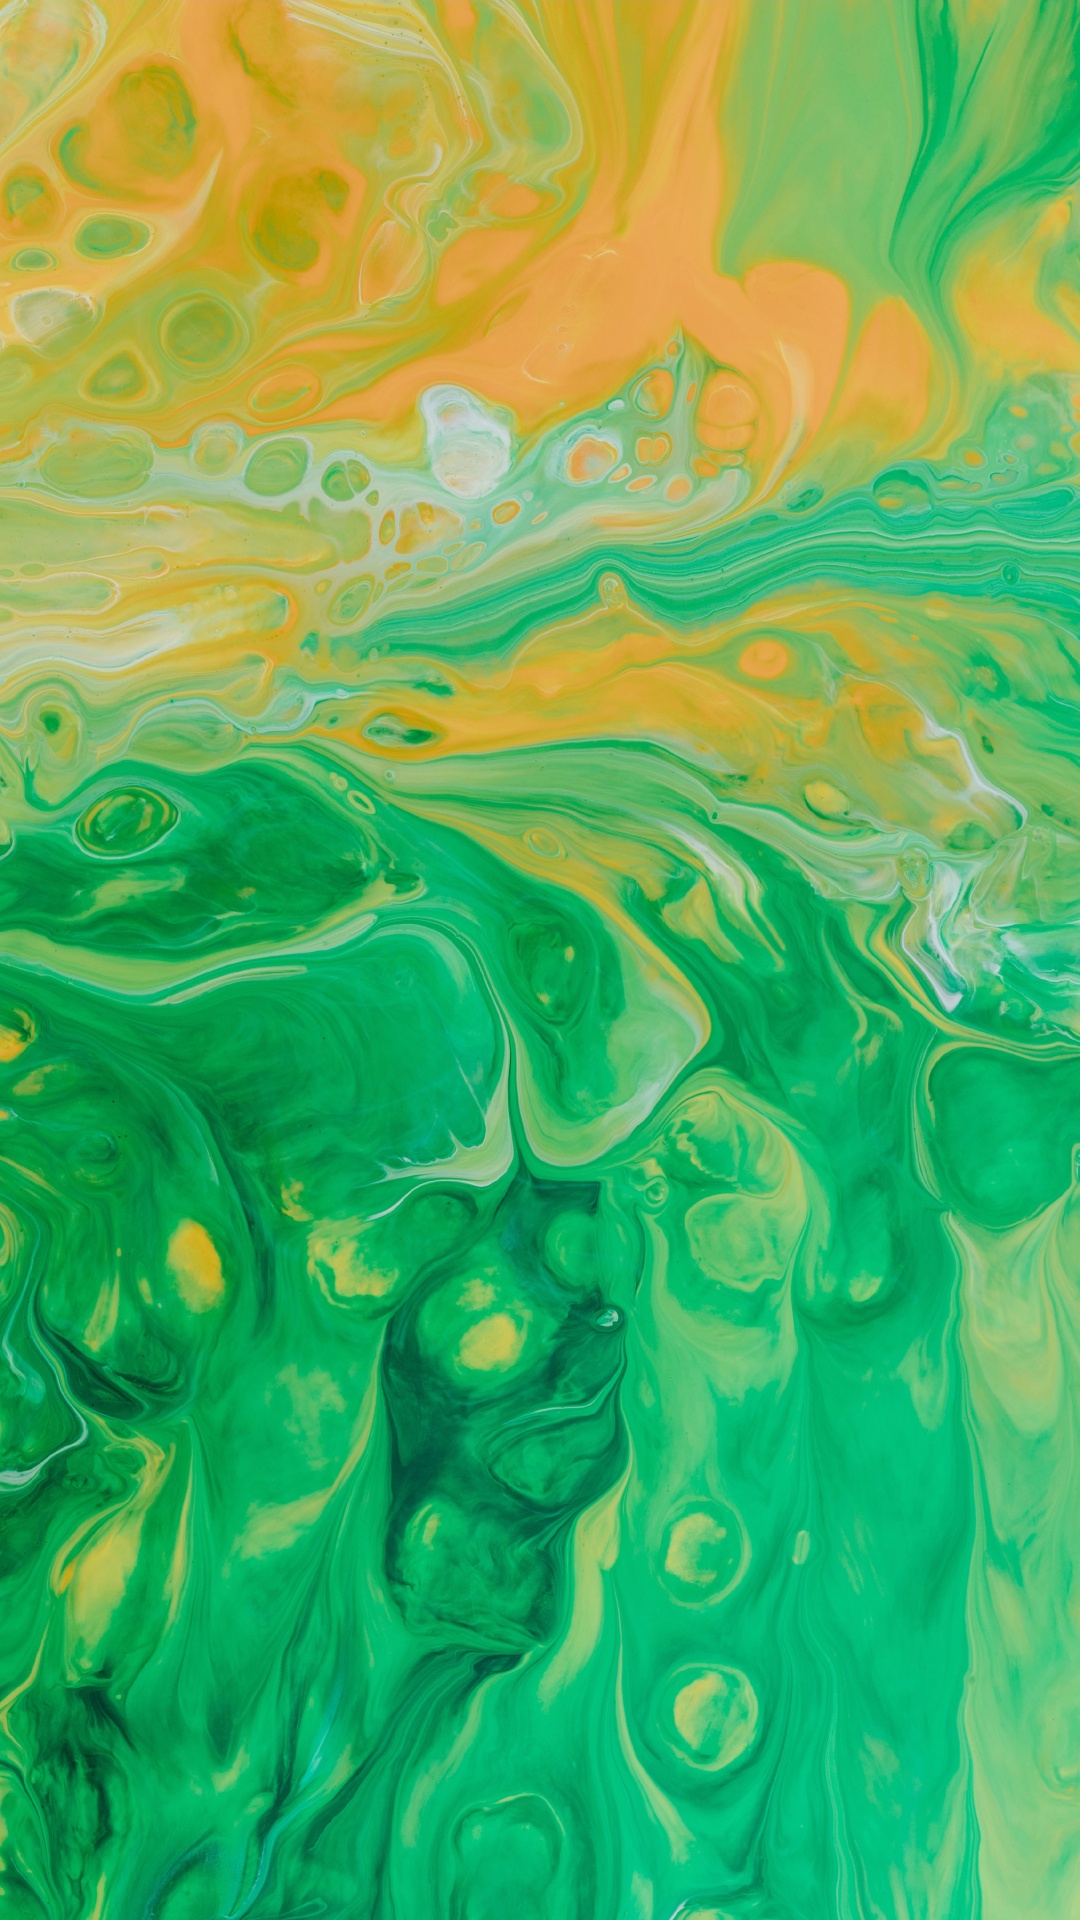 Green and Yellow Abstract Painting. Wallpaper in 1080x1920 Resolution